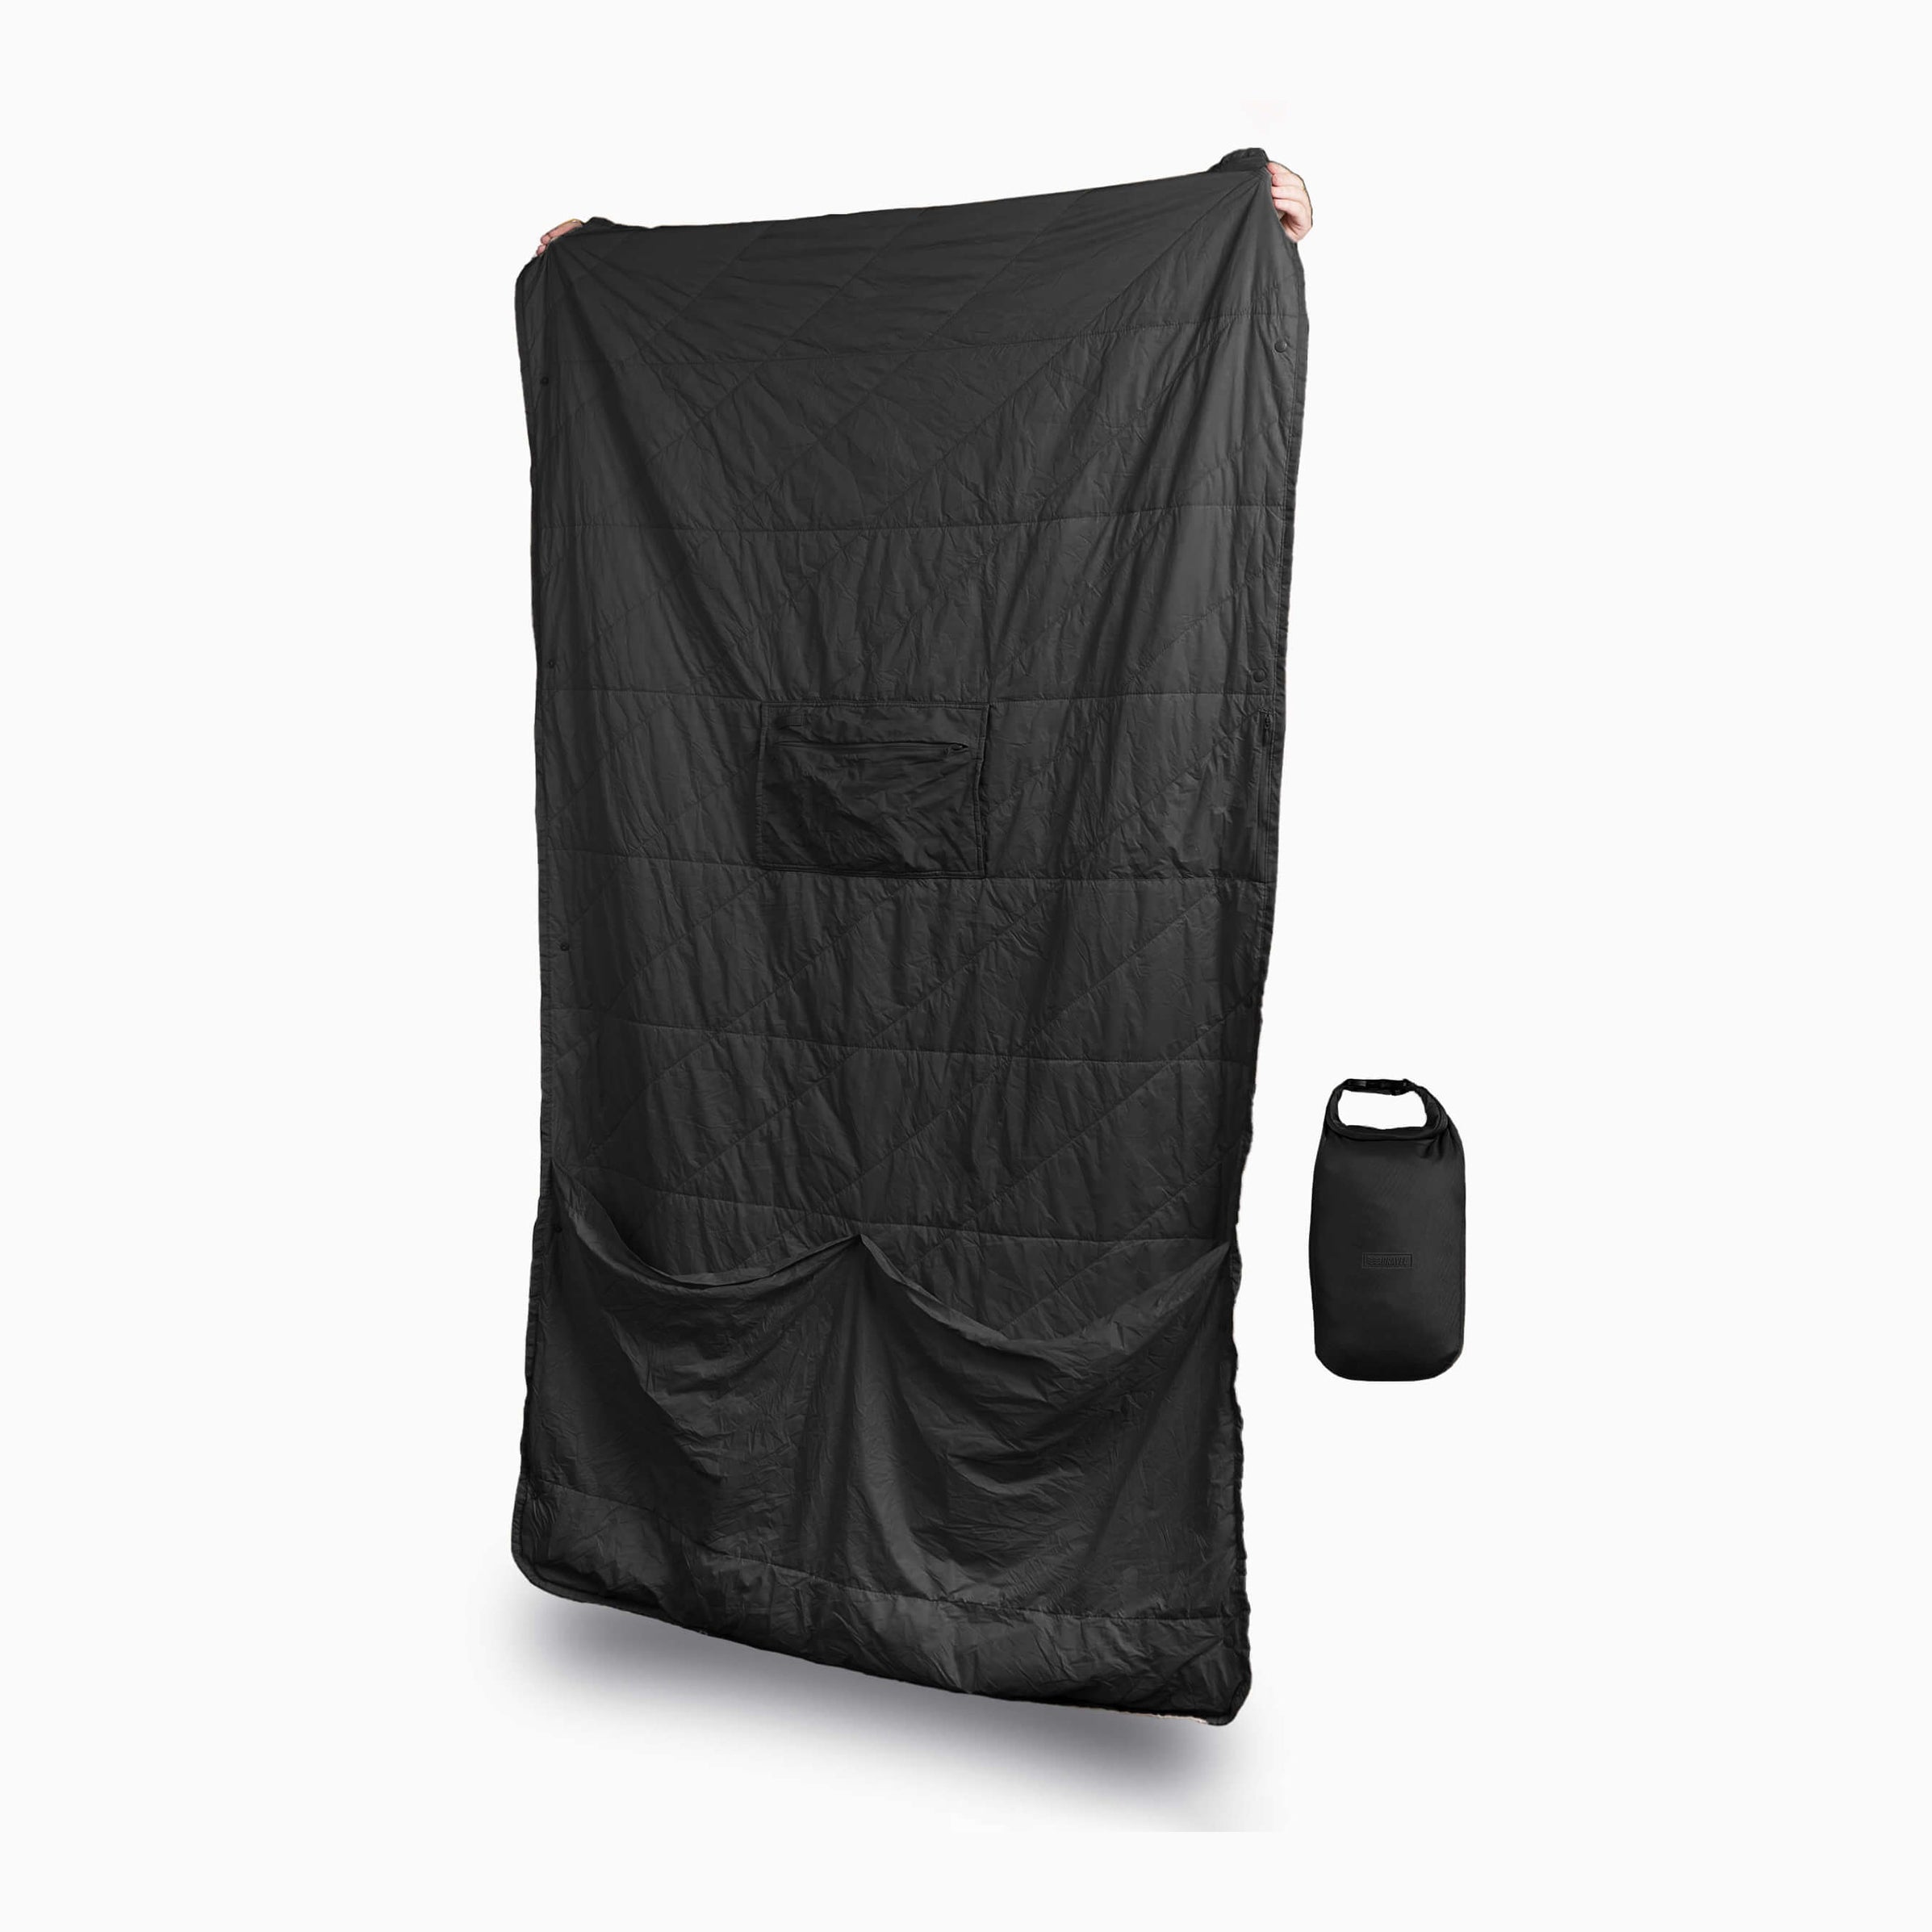 Layover™ Travel Blanket - Insulated & Packable | Black